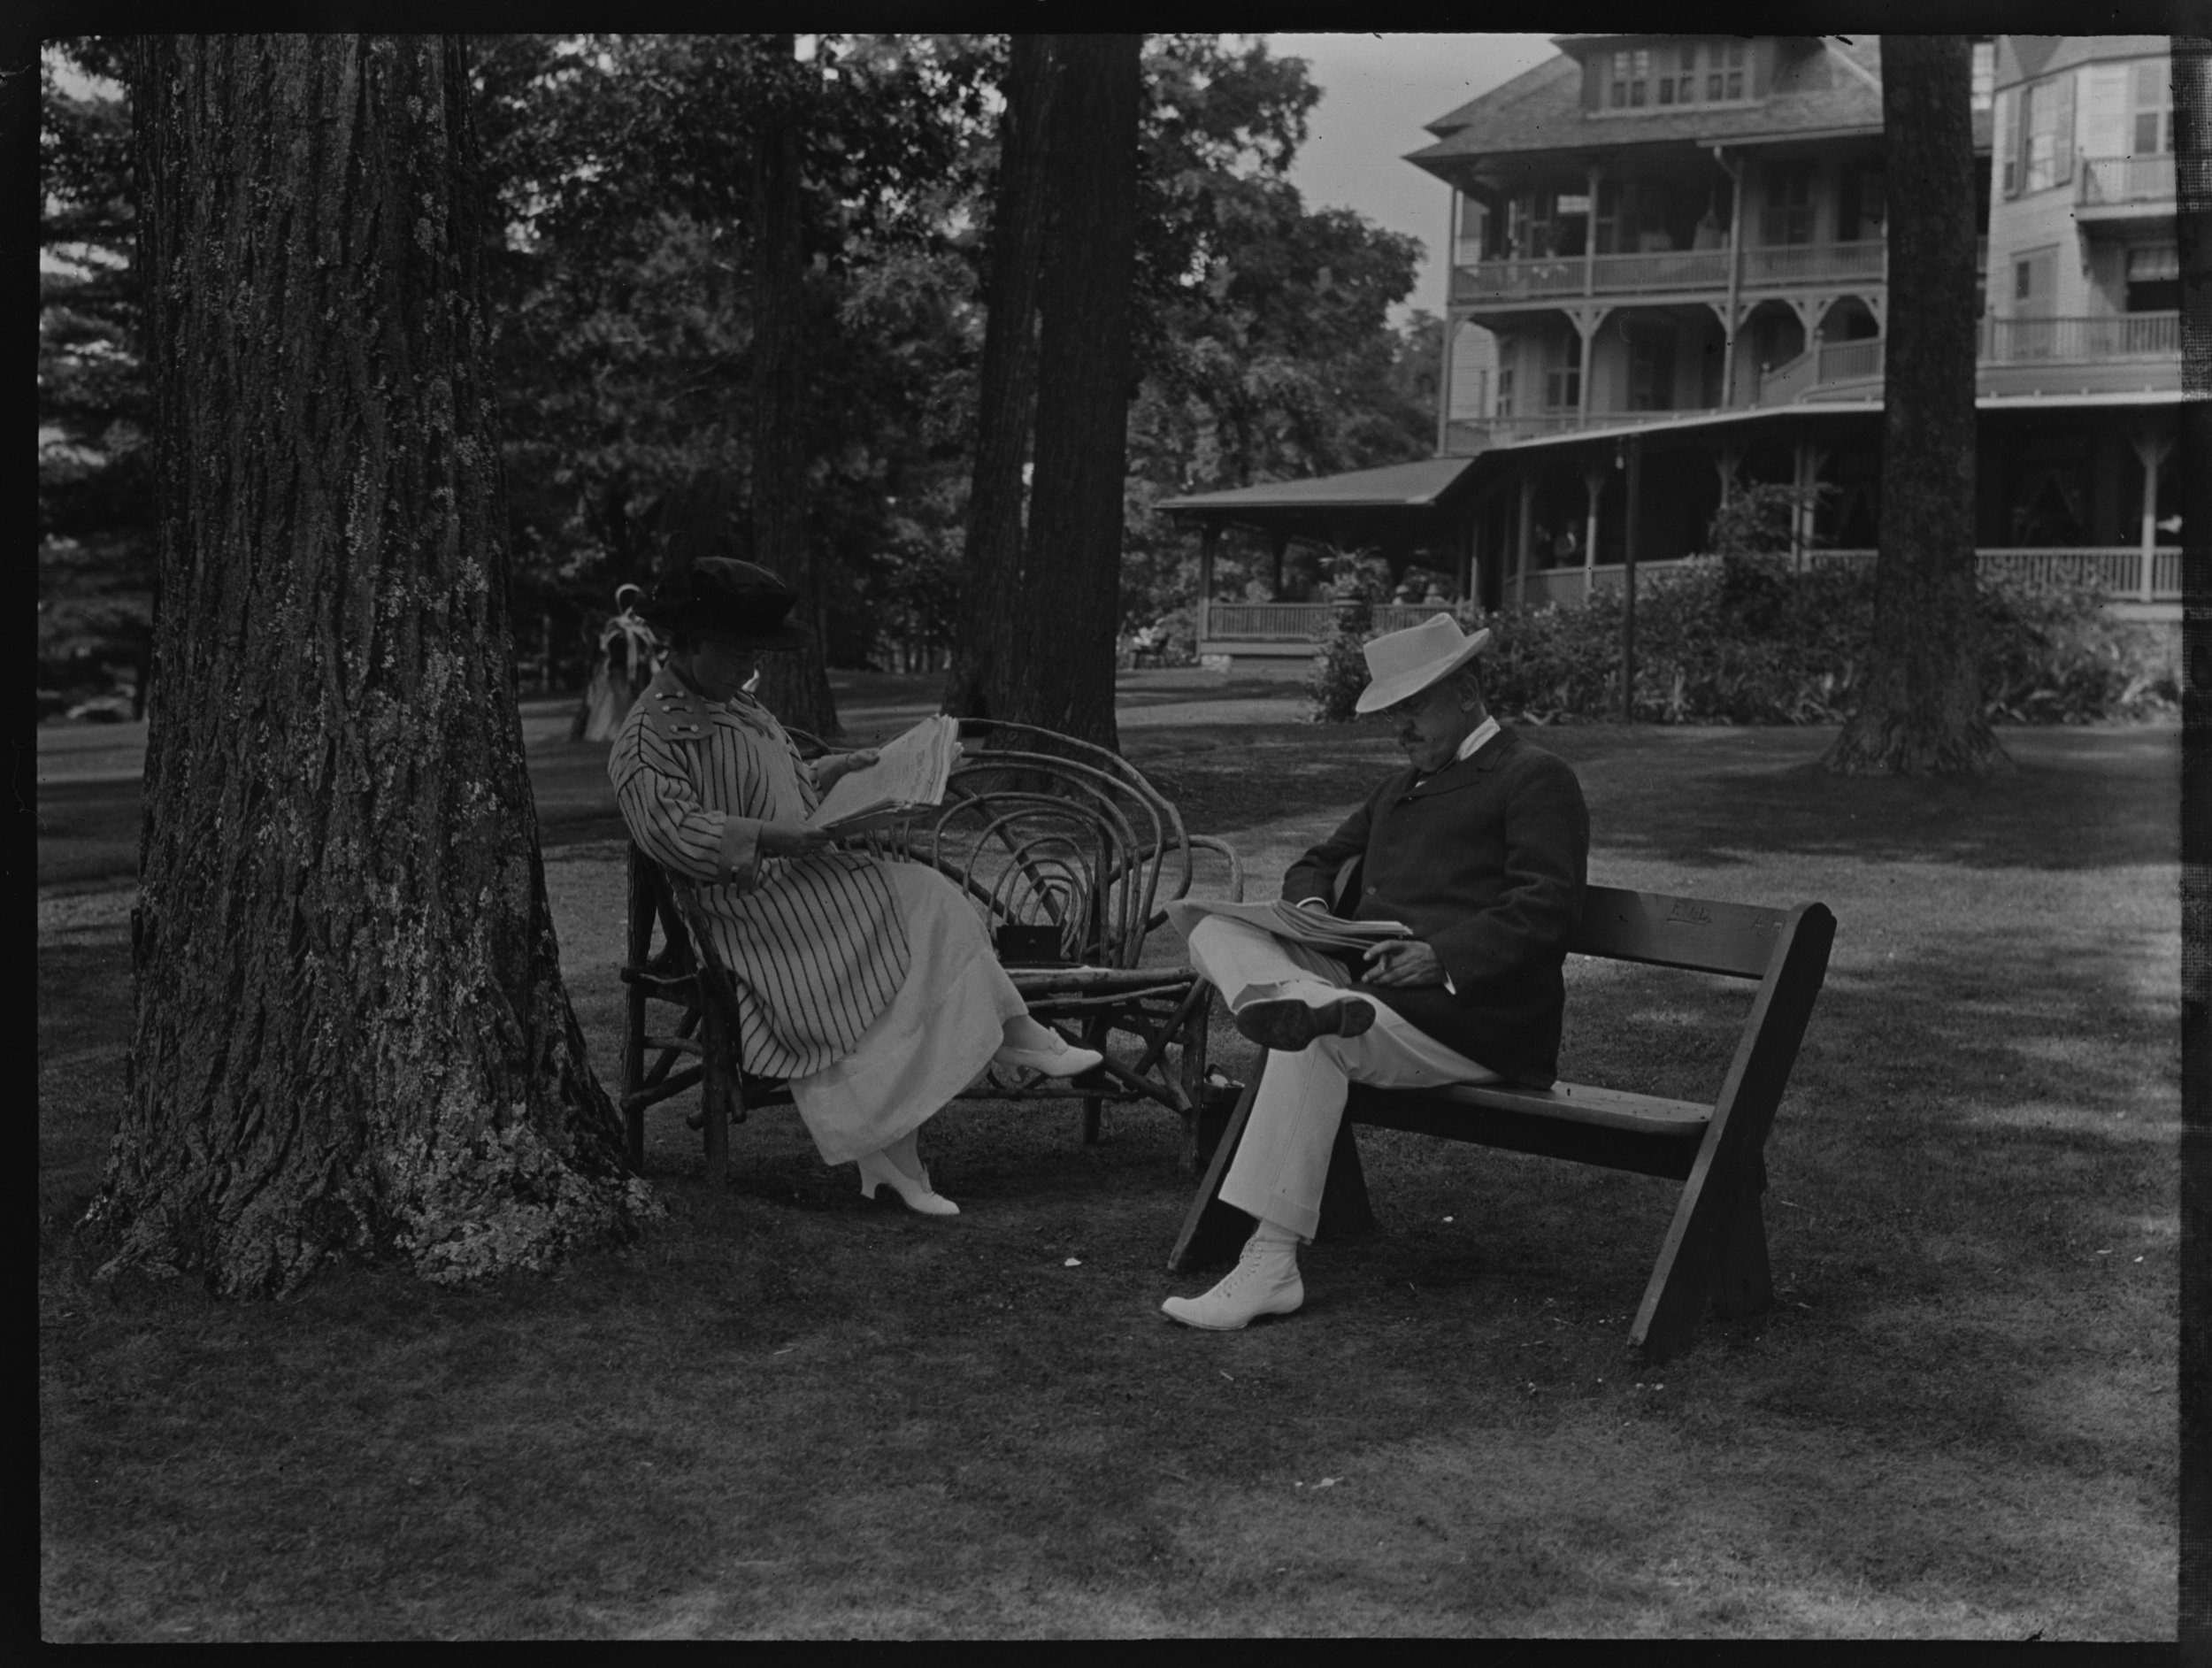 Guy Loomis and Gertrude Tate at the Sagamore Hotel, Lake George, New York, August 24, 1913